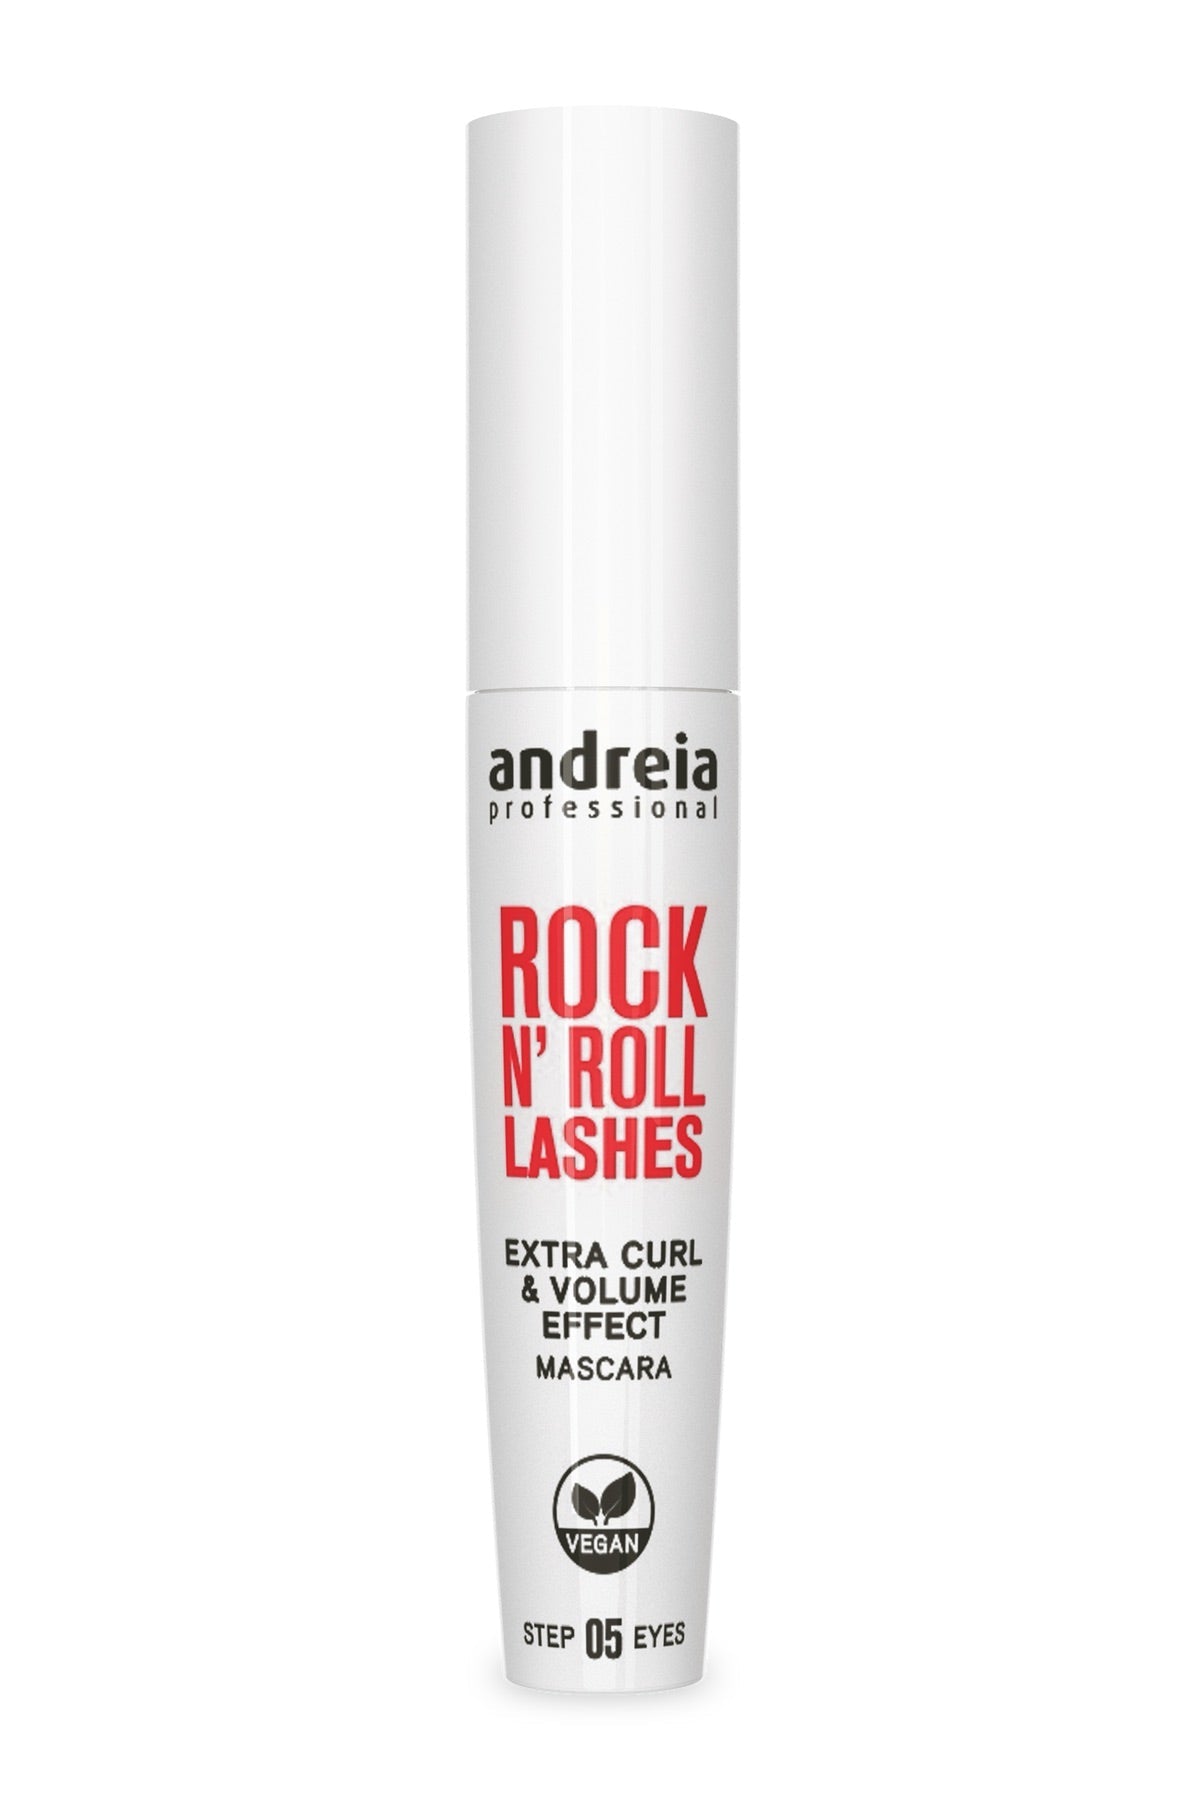 Andreia Rock n’ Roll Lashes - The Beauty Marque